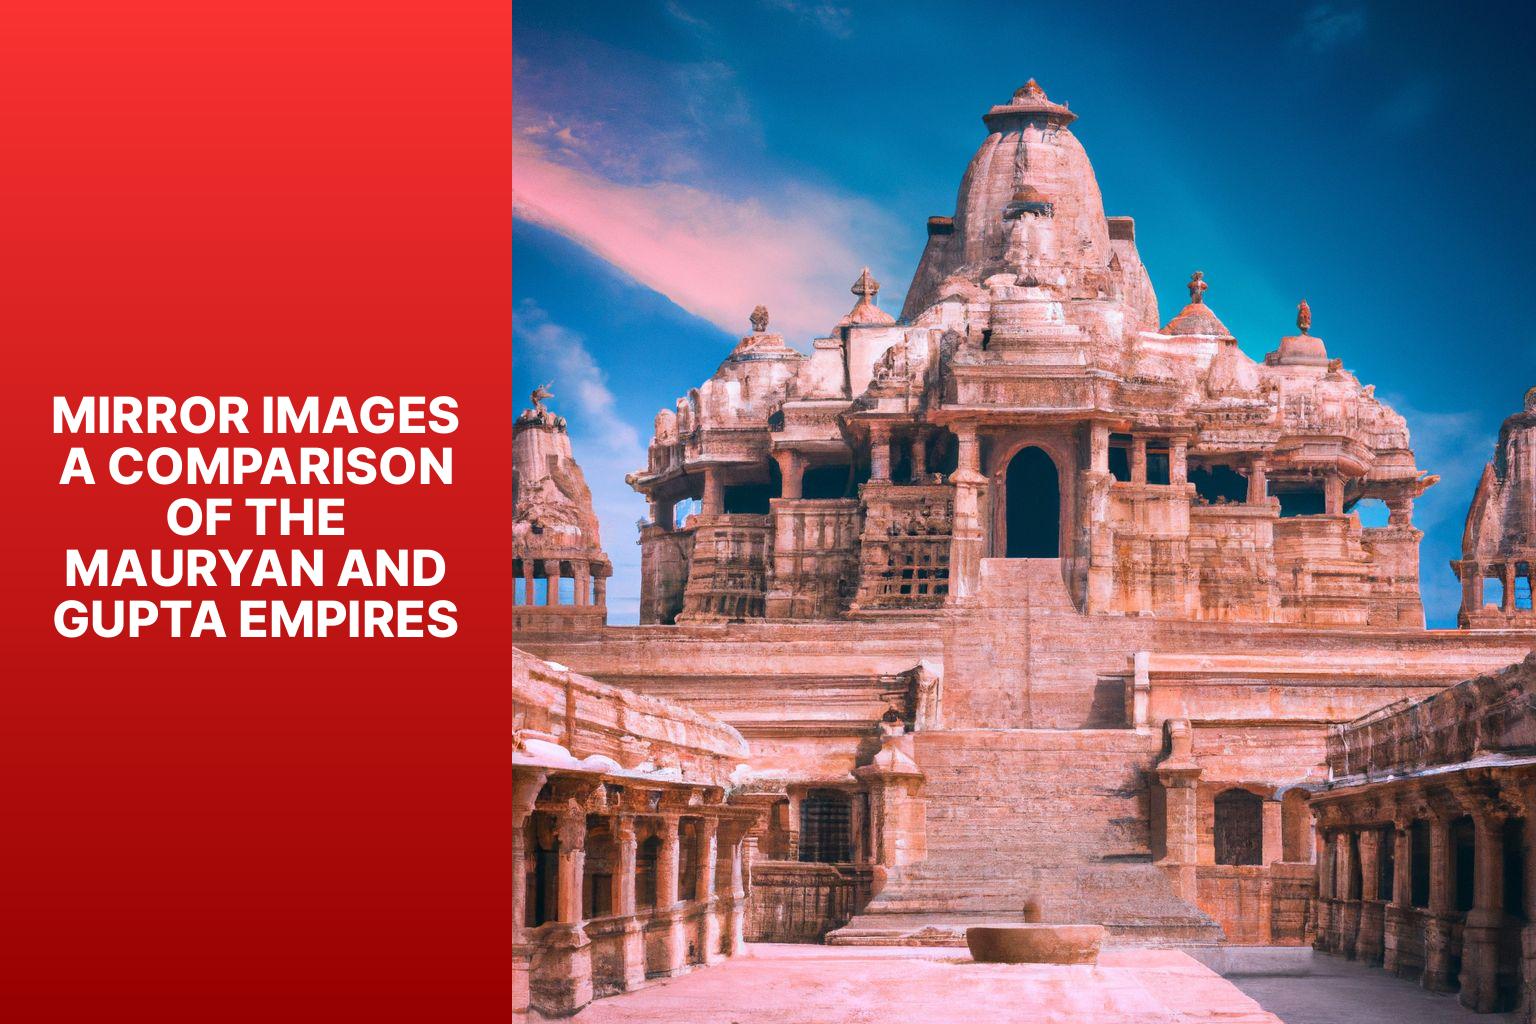 Mirror Images A Comparison of the Mauryan and Gupta Empires